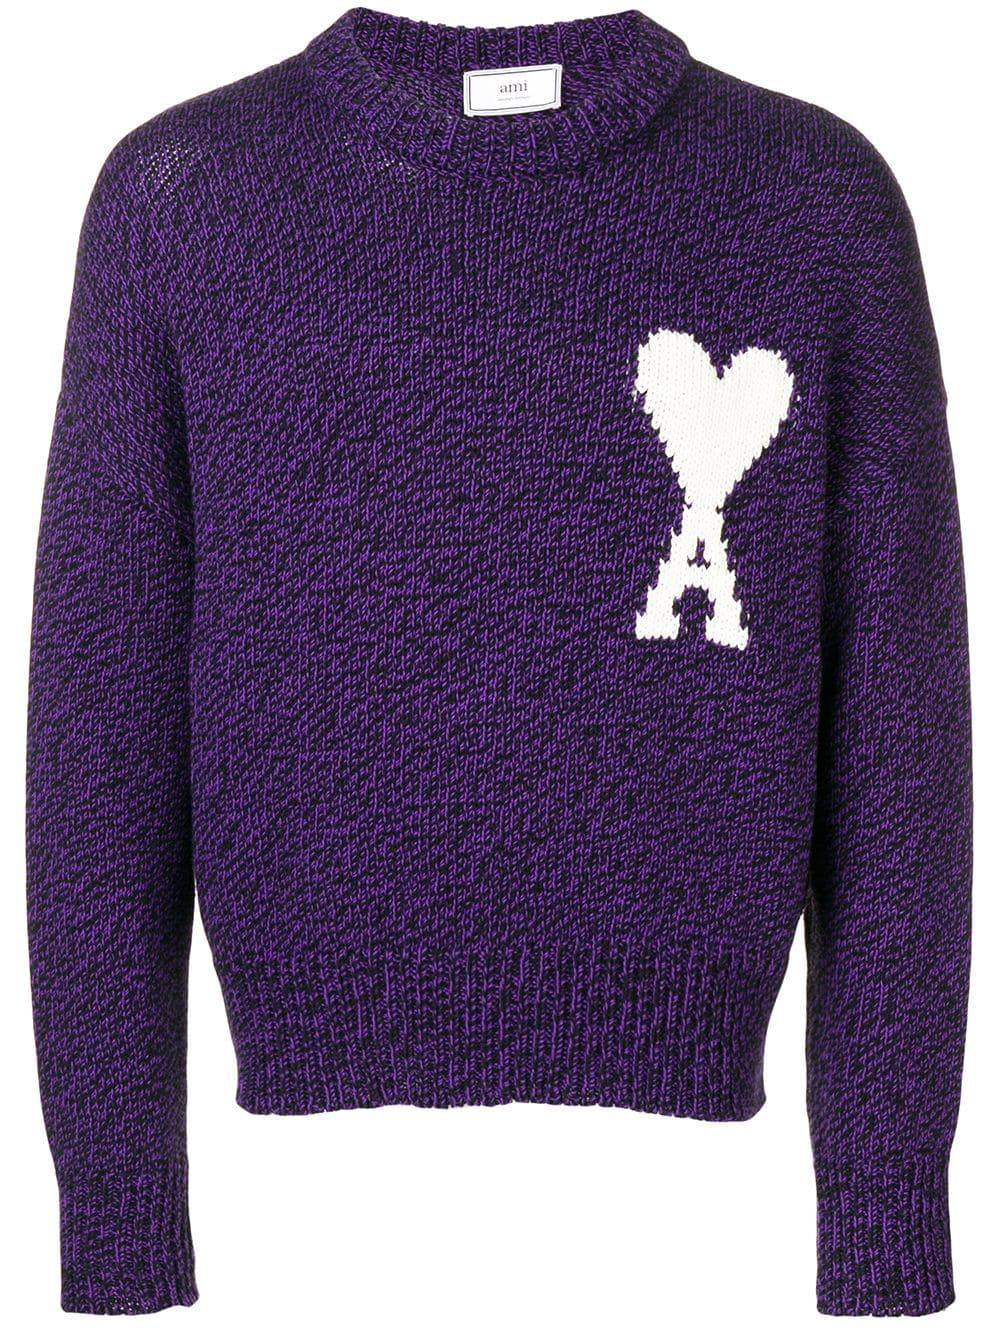 AMI Intarsia-knit Cotton And Wool Logo Sweater in Purple for Men 